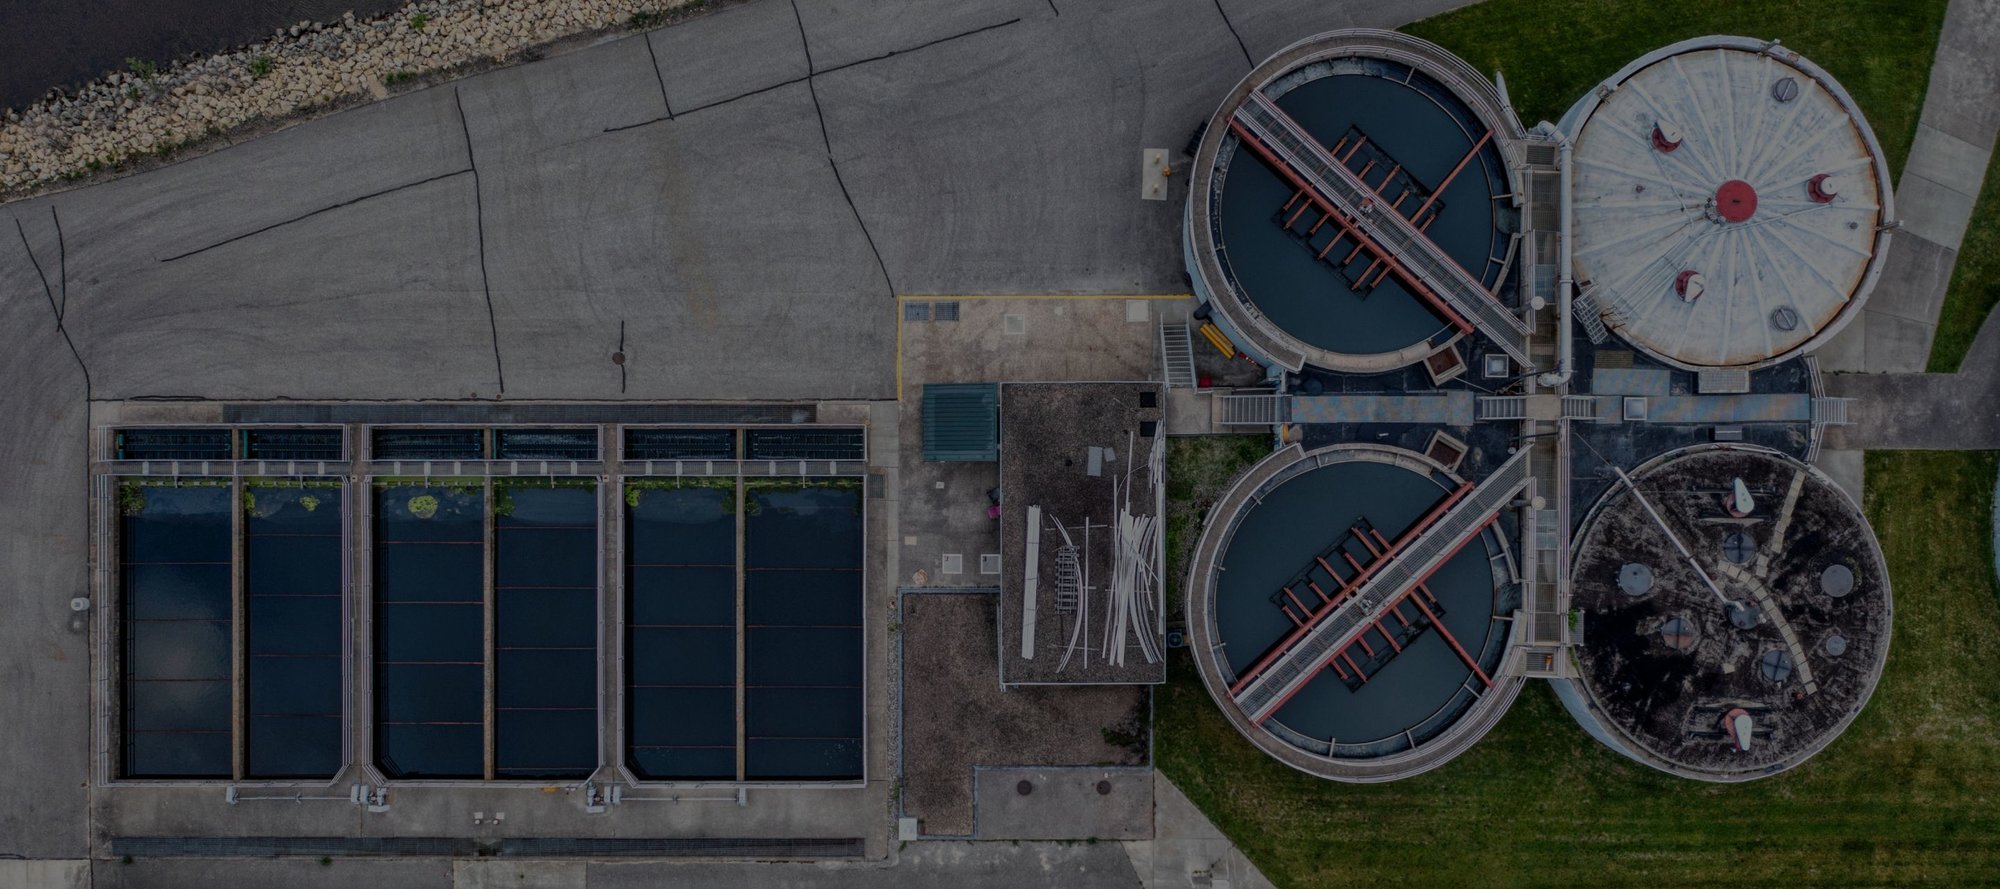 A bird's eye view of a water treatment plant with round water tanks and water being treated in rows